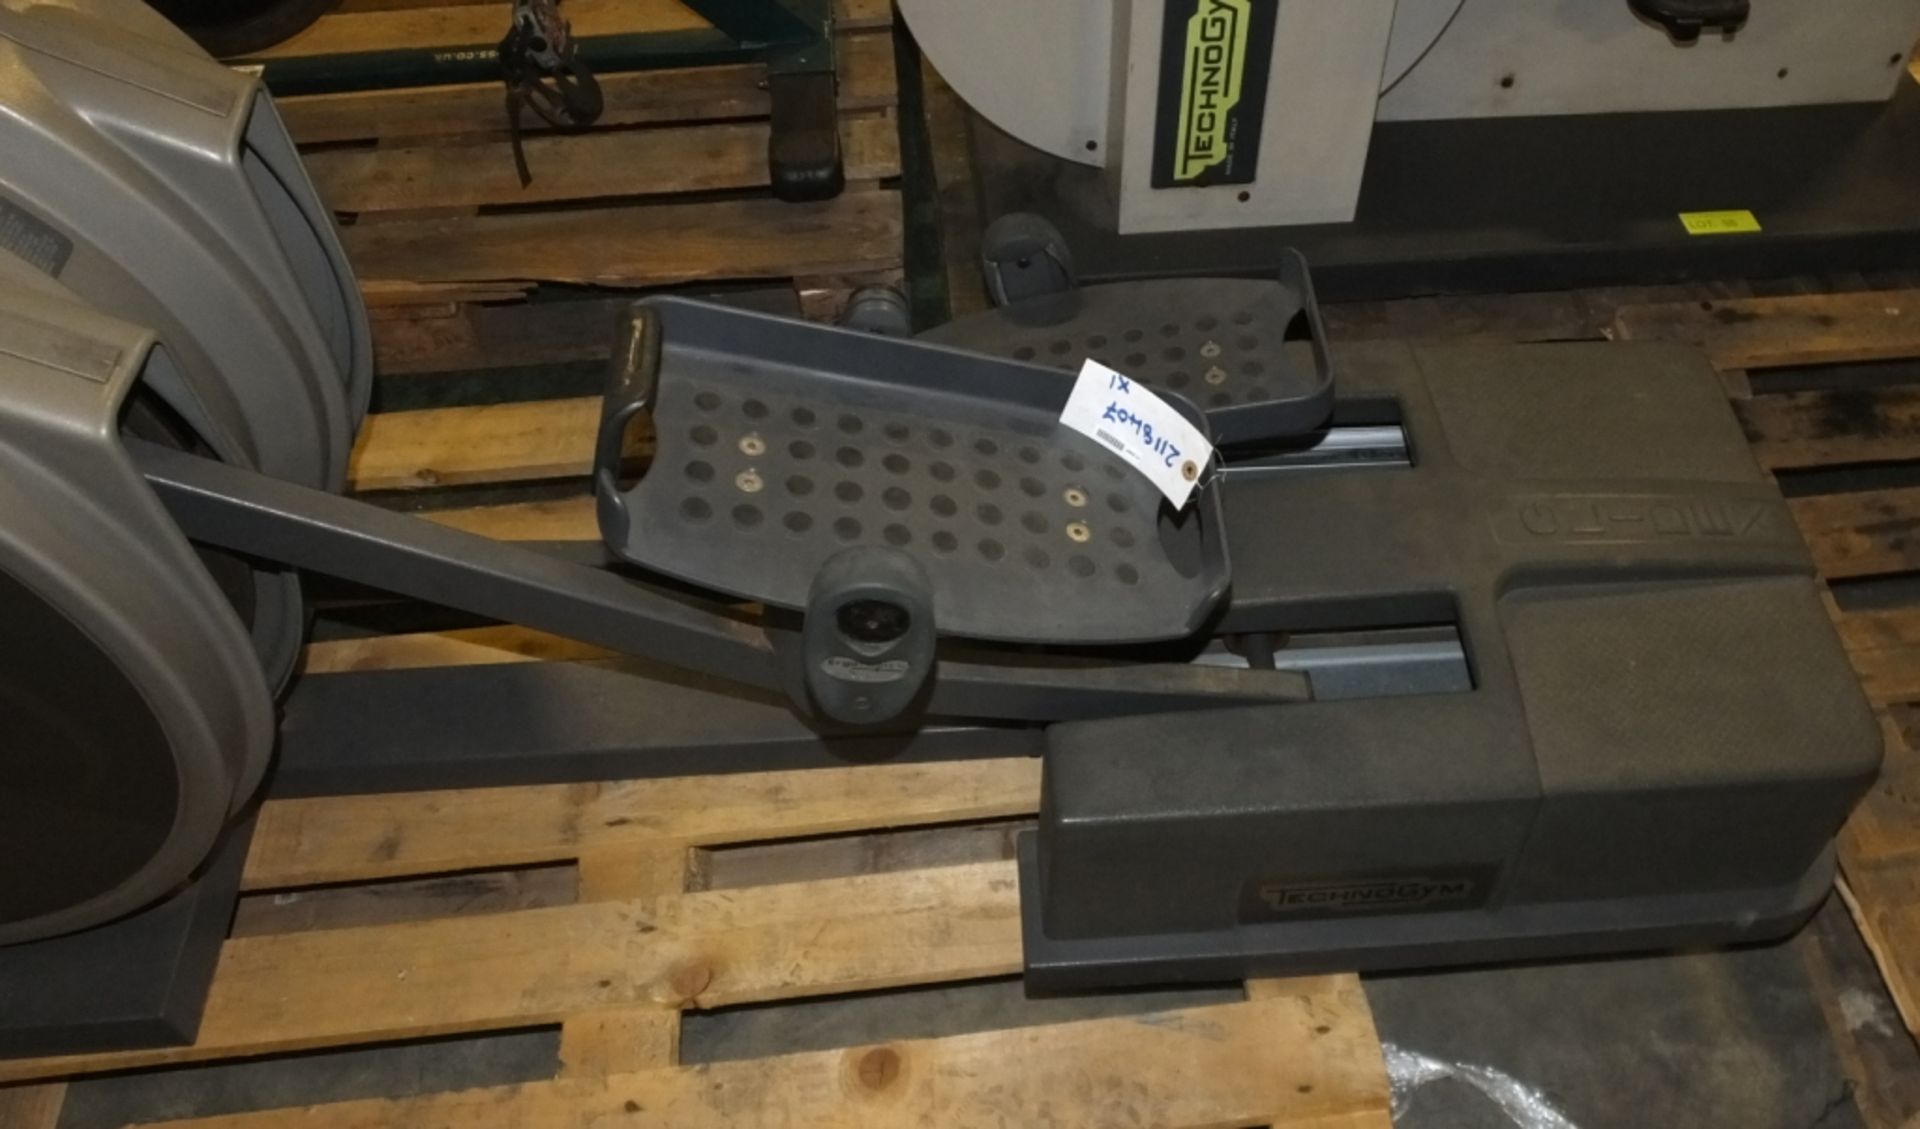 Technogym Glidex 600 Cross Trainer - as spares - Image 3 of 3